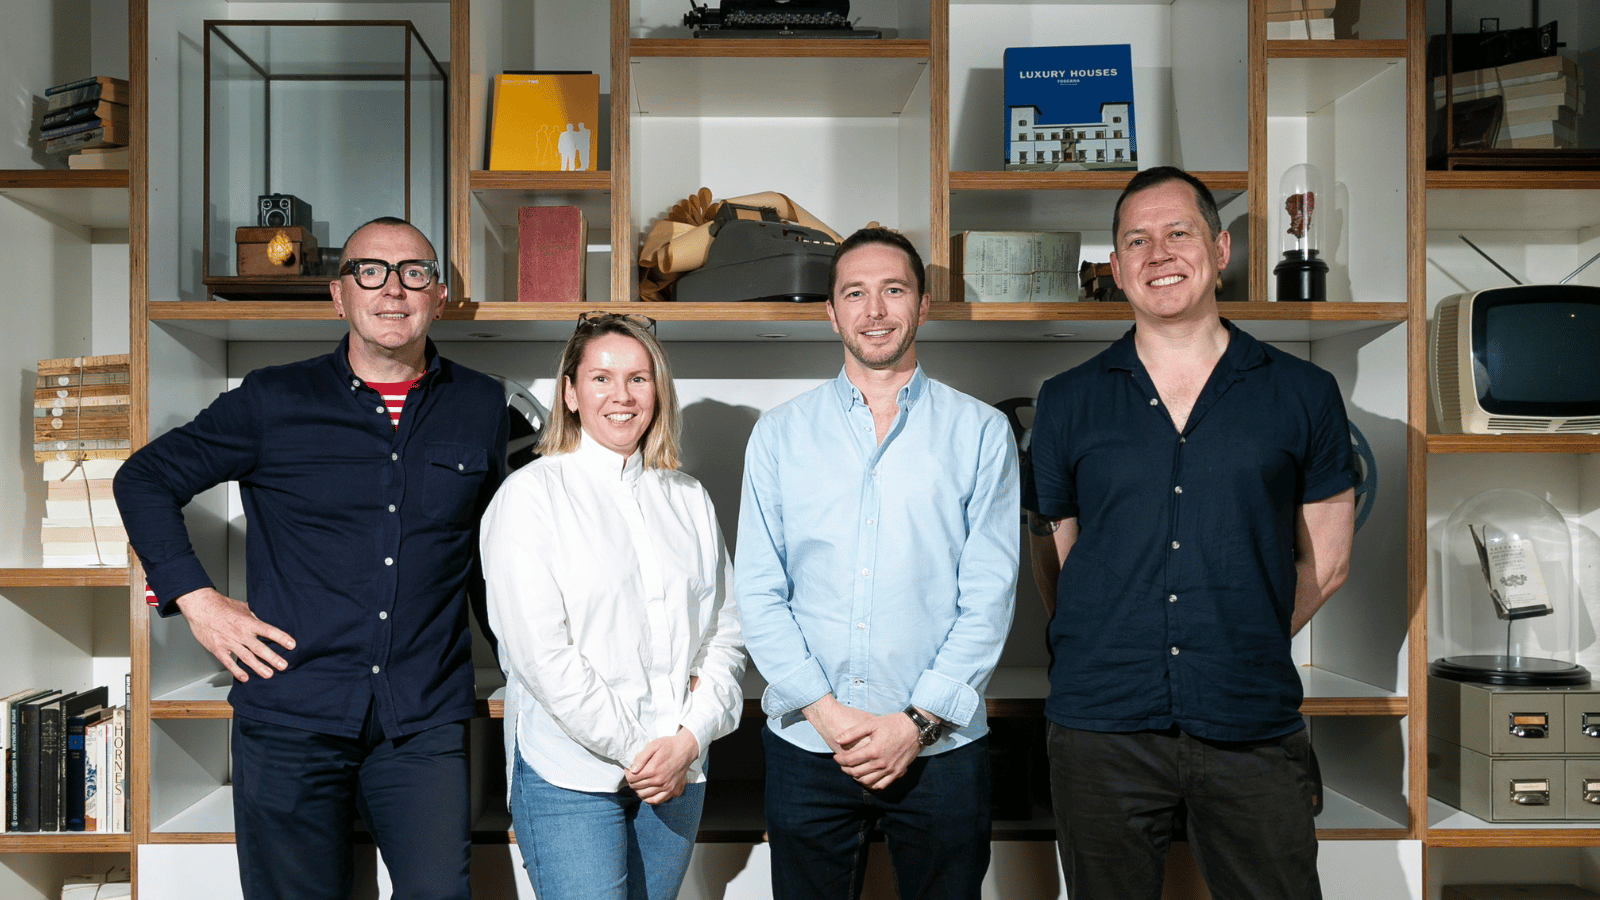 Paul Murray, Amy Jackson, Ken Petrie and Reece Cargan stand in front of a set of shelves, covered with objects including books and a typewriter